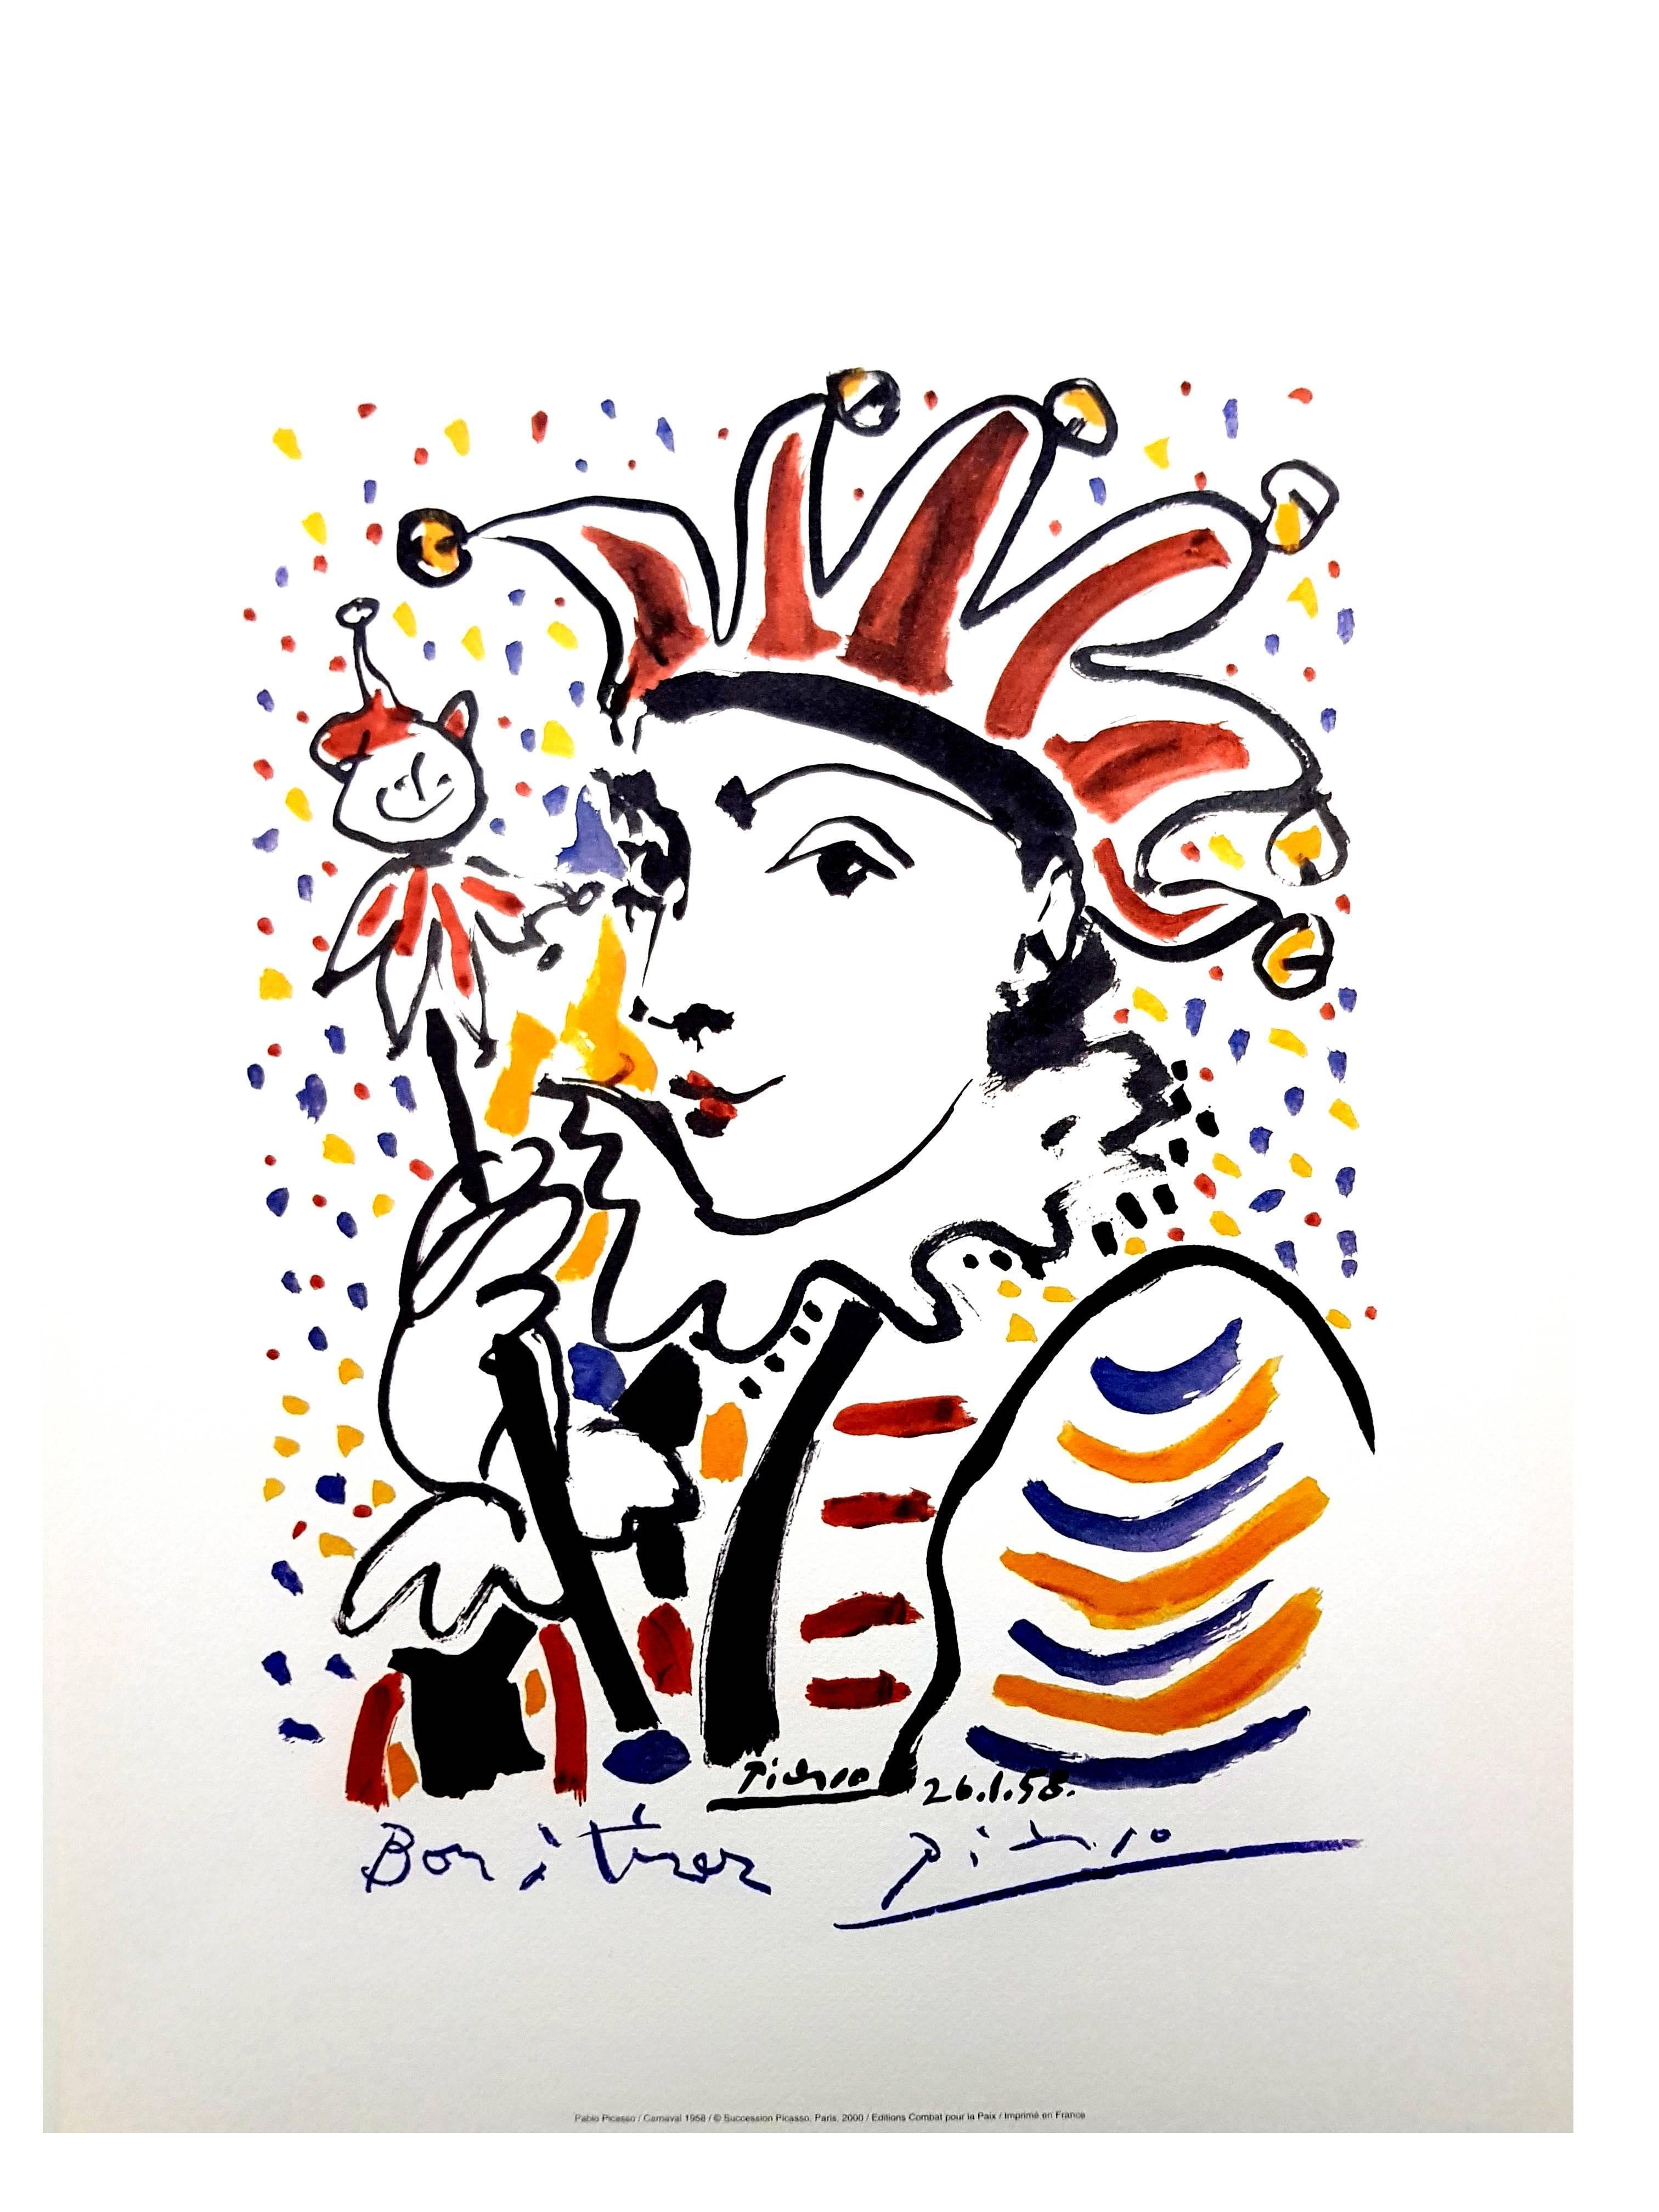 After PABLO PICASSO (1881-1973)
Carnaval
Dimensions: 50 x 40 cm
Signed and dated in the plate
Color lithograph on Velin D'Arches realized from a drawing
Edition Succession Picasso, Paris (posthumous reproductive edition)
Editions de la Paix